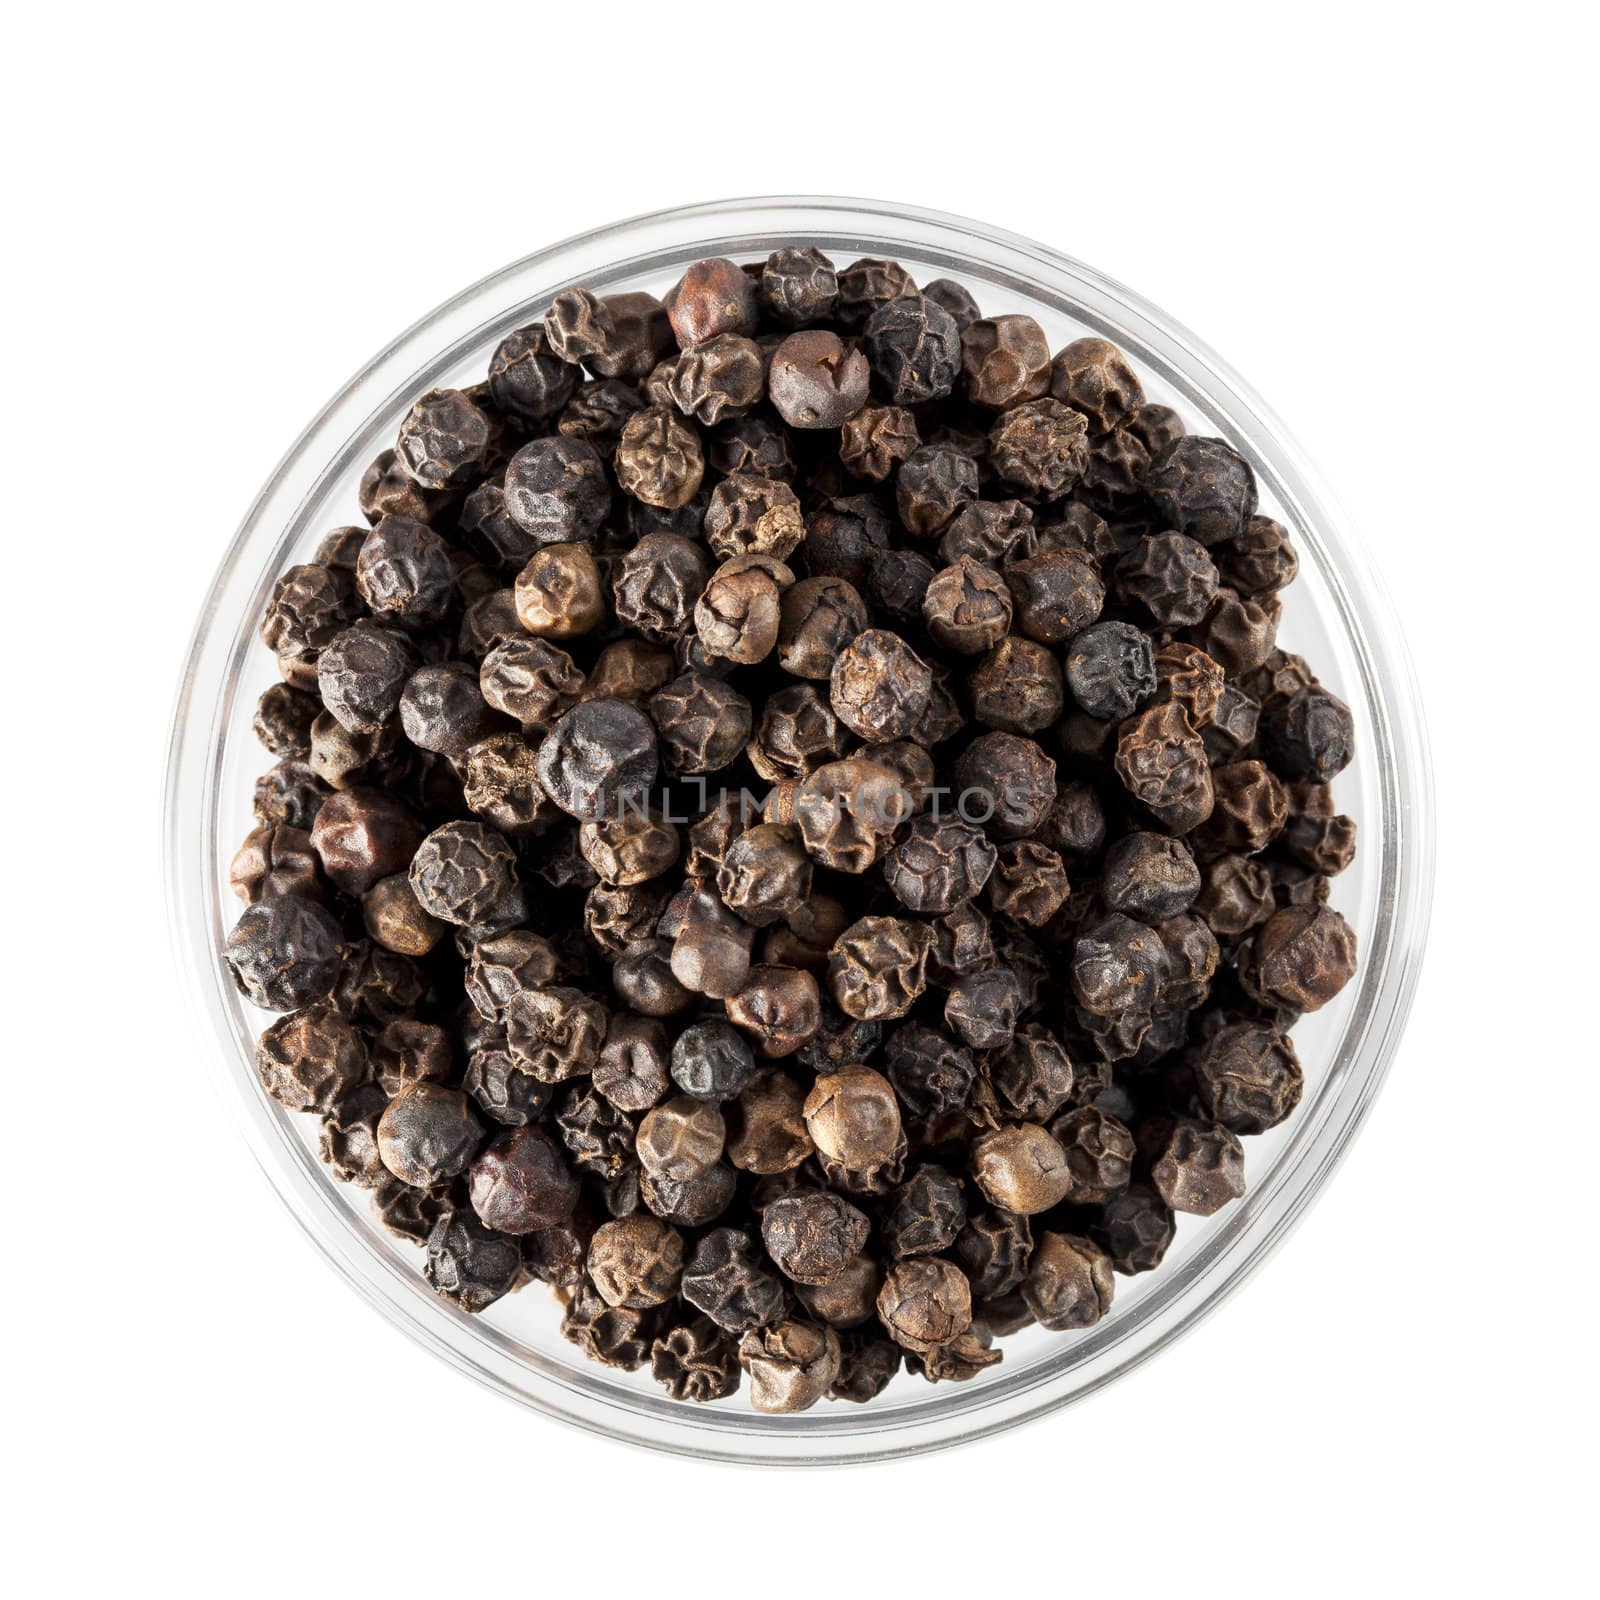 Black peppercorns in glass bowl, isolated and shot from directly above.